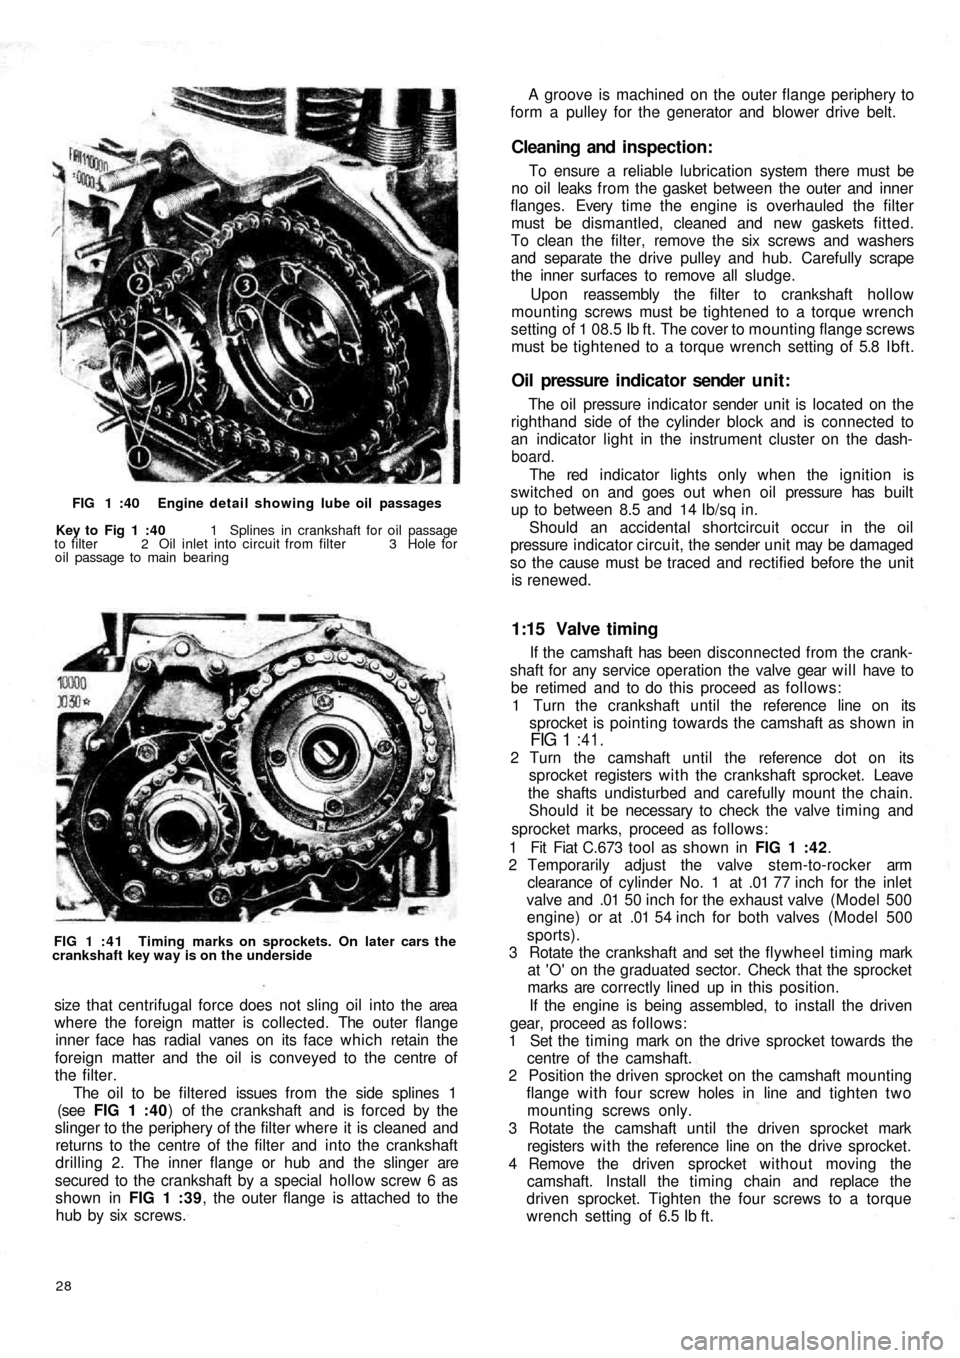 FIAT 500 1968 1.G Workshop Manual FIG 1 :40  Engine detail showing lube oil passages
Key to Fig 1 :40  1  Splines in crankshaft for oil passage
to filter  2  Oil inlet into circuit from filter 3 Hole for
oil passage to main bearing
FI